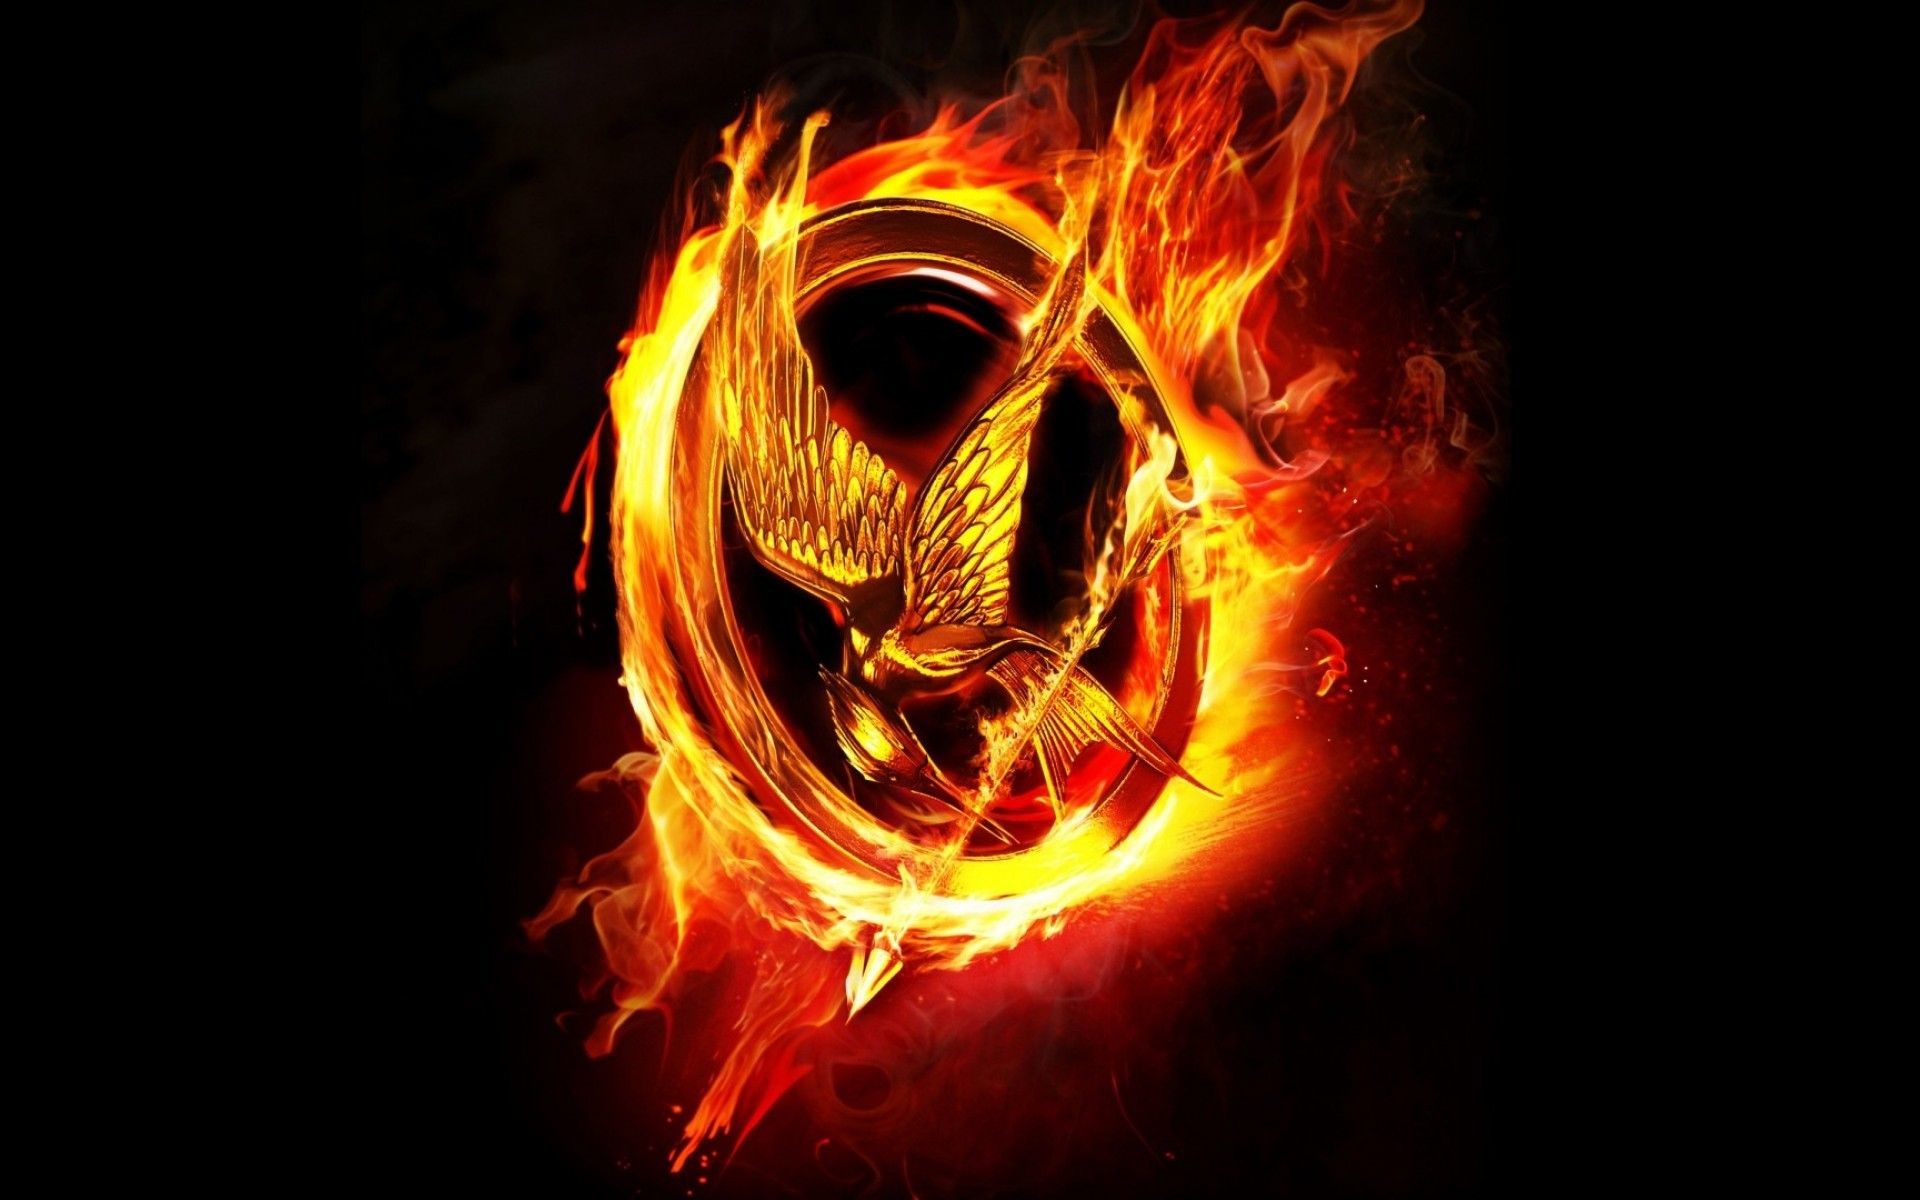 Coolest Backgrounds - Hunger Games Mockingjay Pin On Fire - HD Wallpaper 